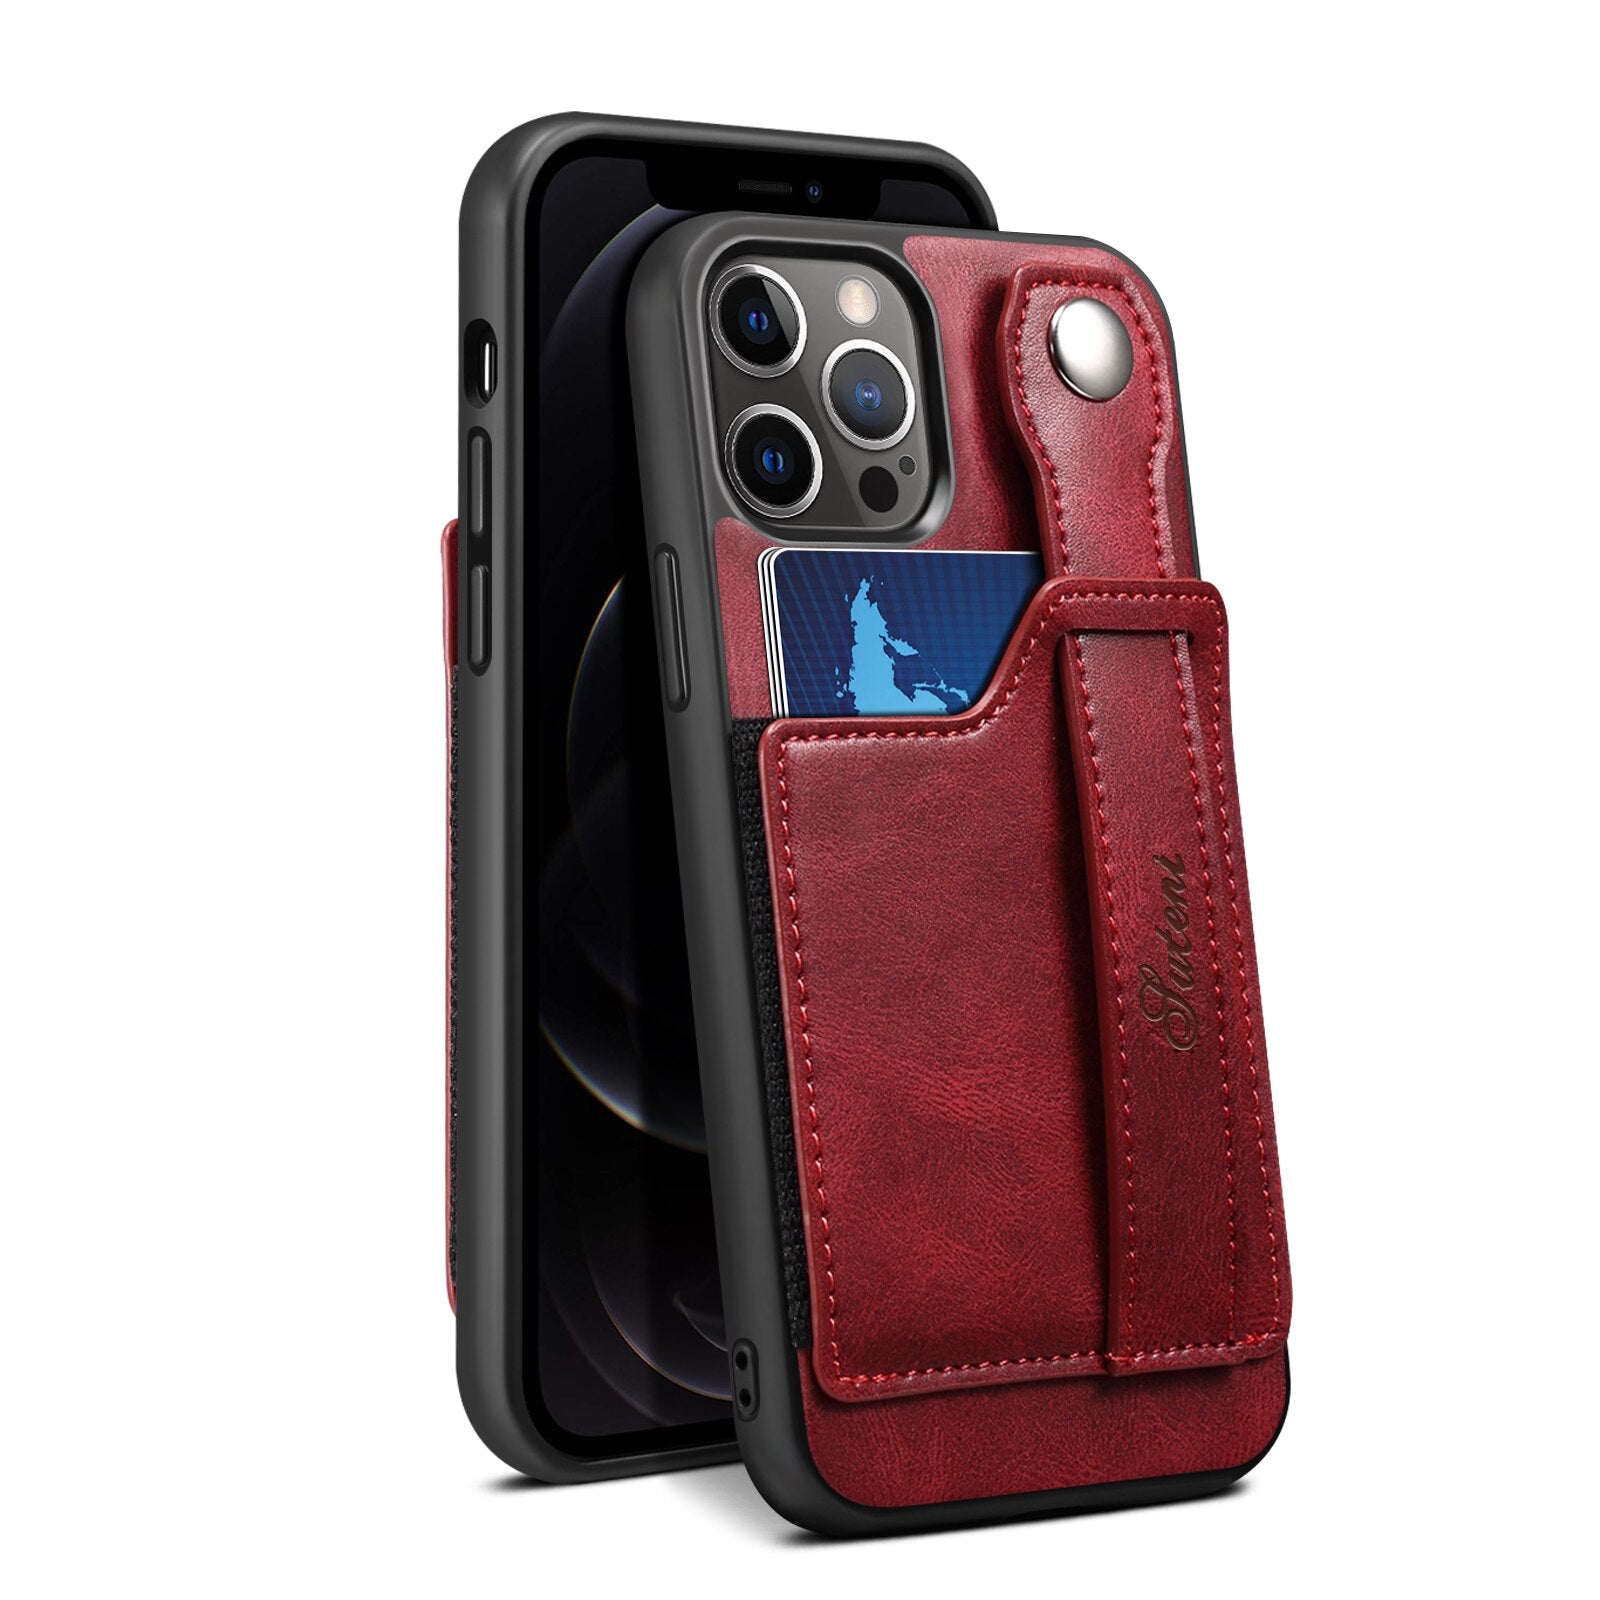 iPhone 12/12 Pro/12 Mini/12 Pro Max PU Case Leather Wallet Flip Case - Stand Feature with Wrist Strap and Credit Card Pockets - 380230 for iPhone 12 / Red / United States Find Epic Store